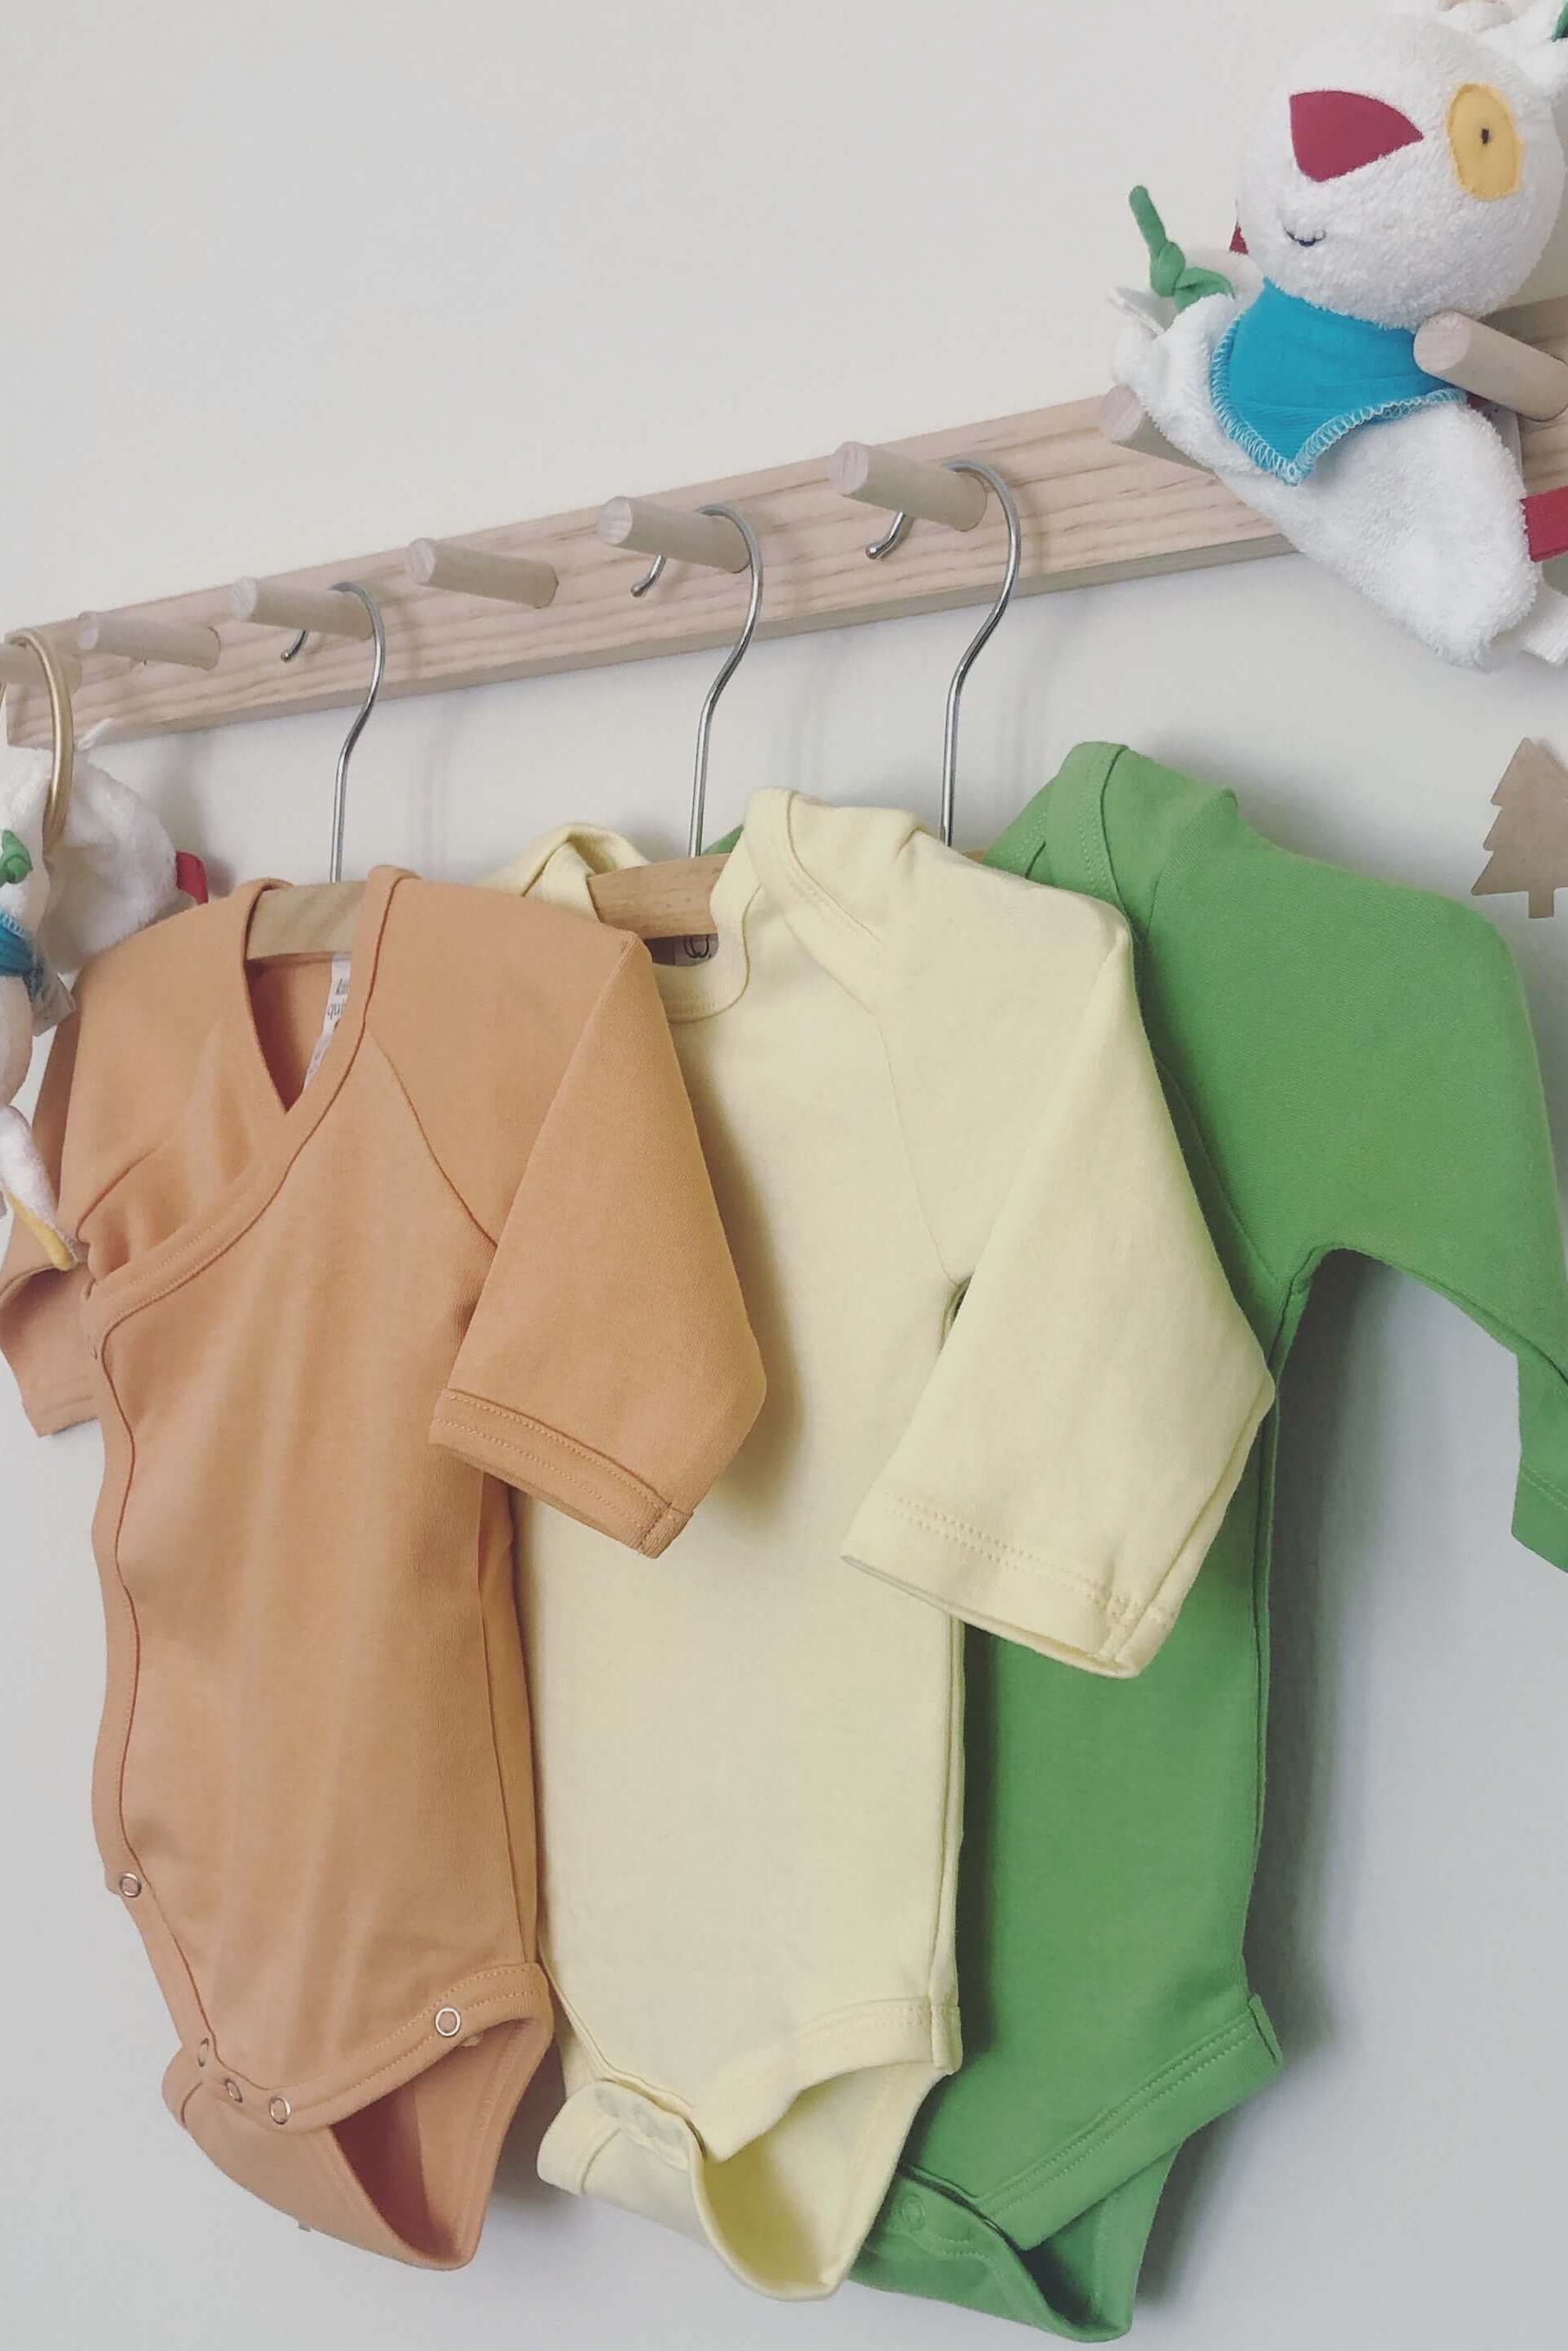 Colorful organic cotton baby bodysuits hanging on a rack